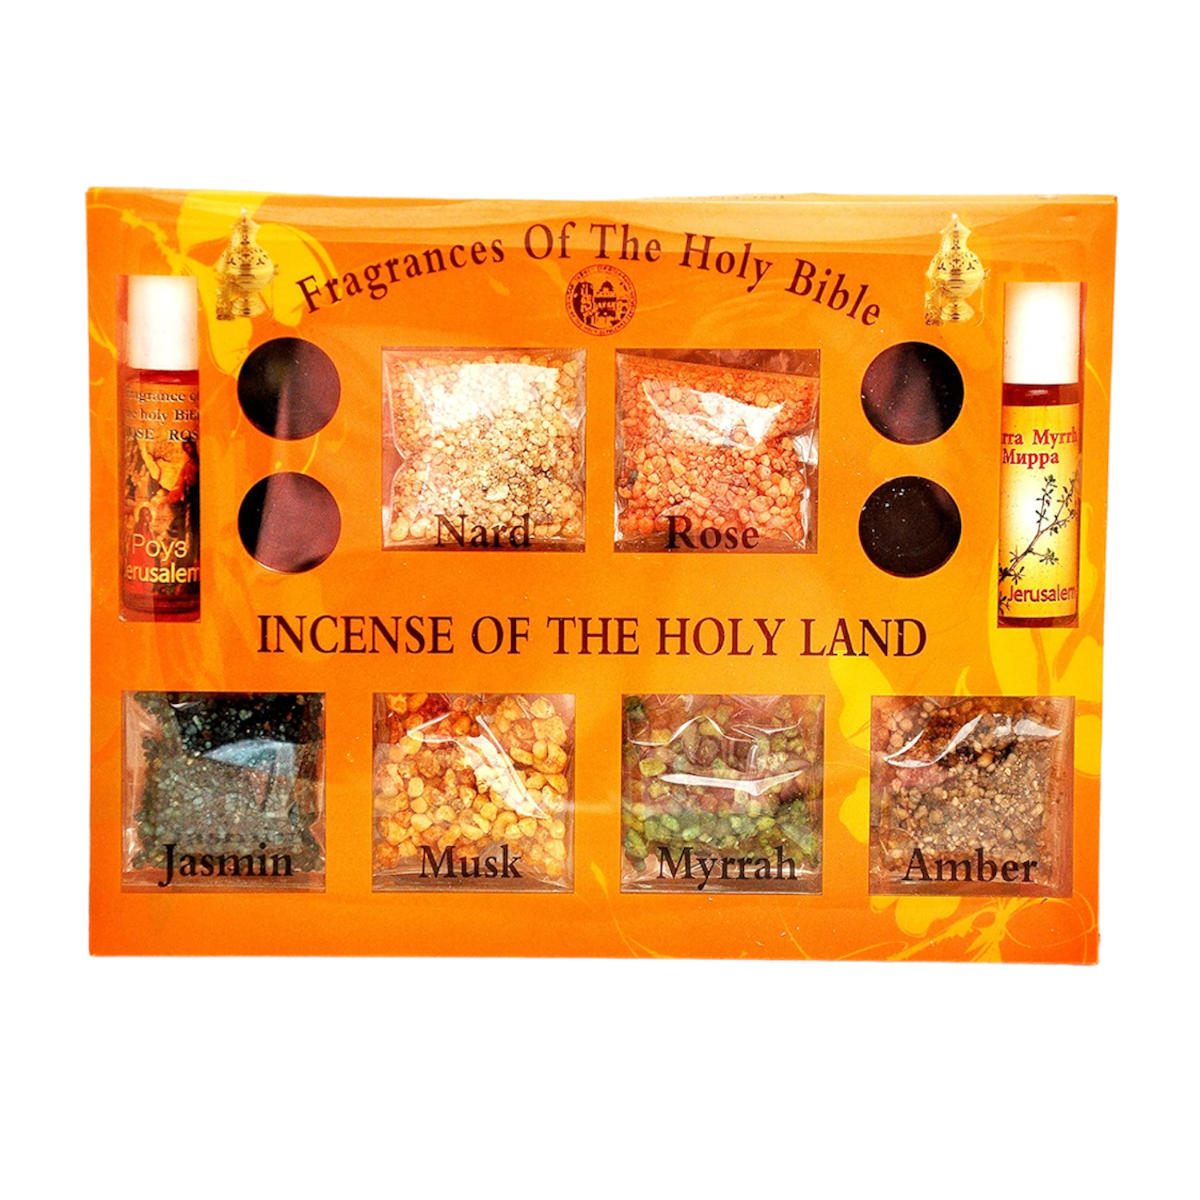 Holy Land Incense set: 7 fragrances Nard Rose, Jasmin, Musk, Myrrah, Amber, 2 Anointing Oil and 4 charcoal Incense from the Holy Land kit